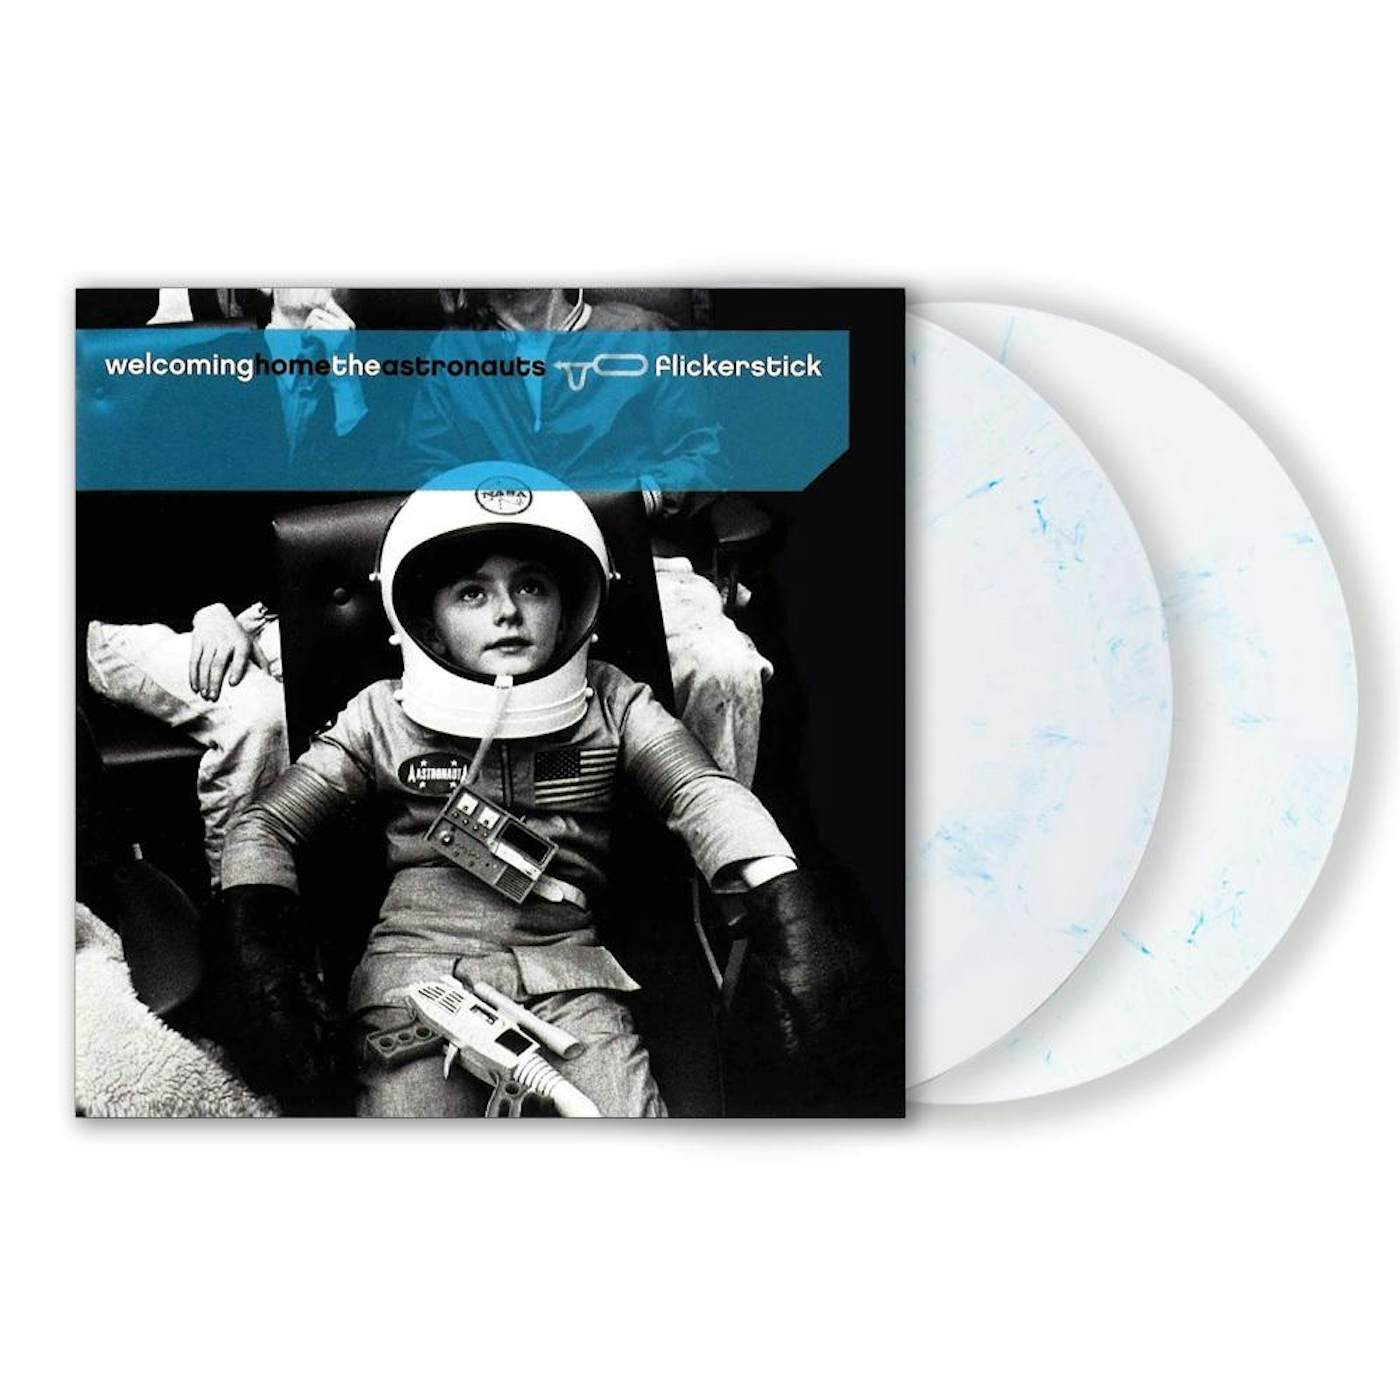 Flickerstick - Limited Edition Welcoming Home The Astronauts Swirl LP (Vinyl)